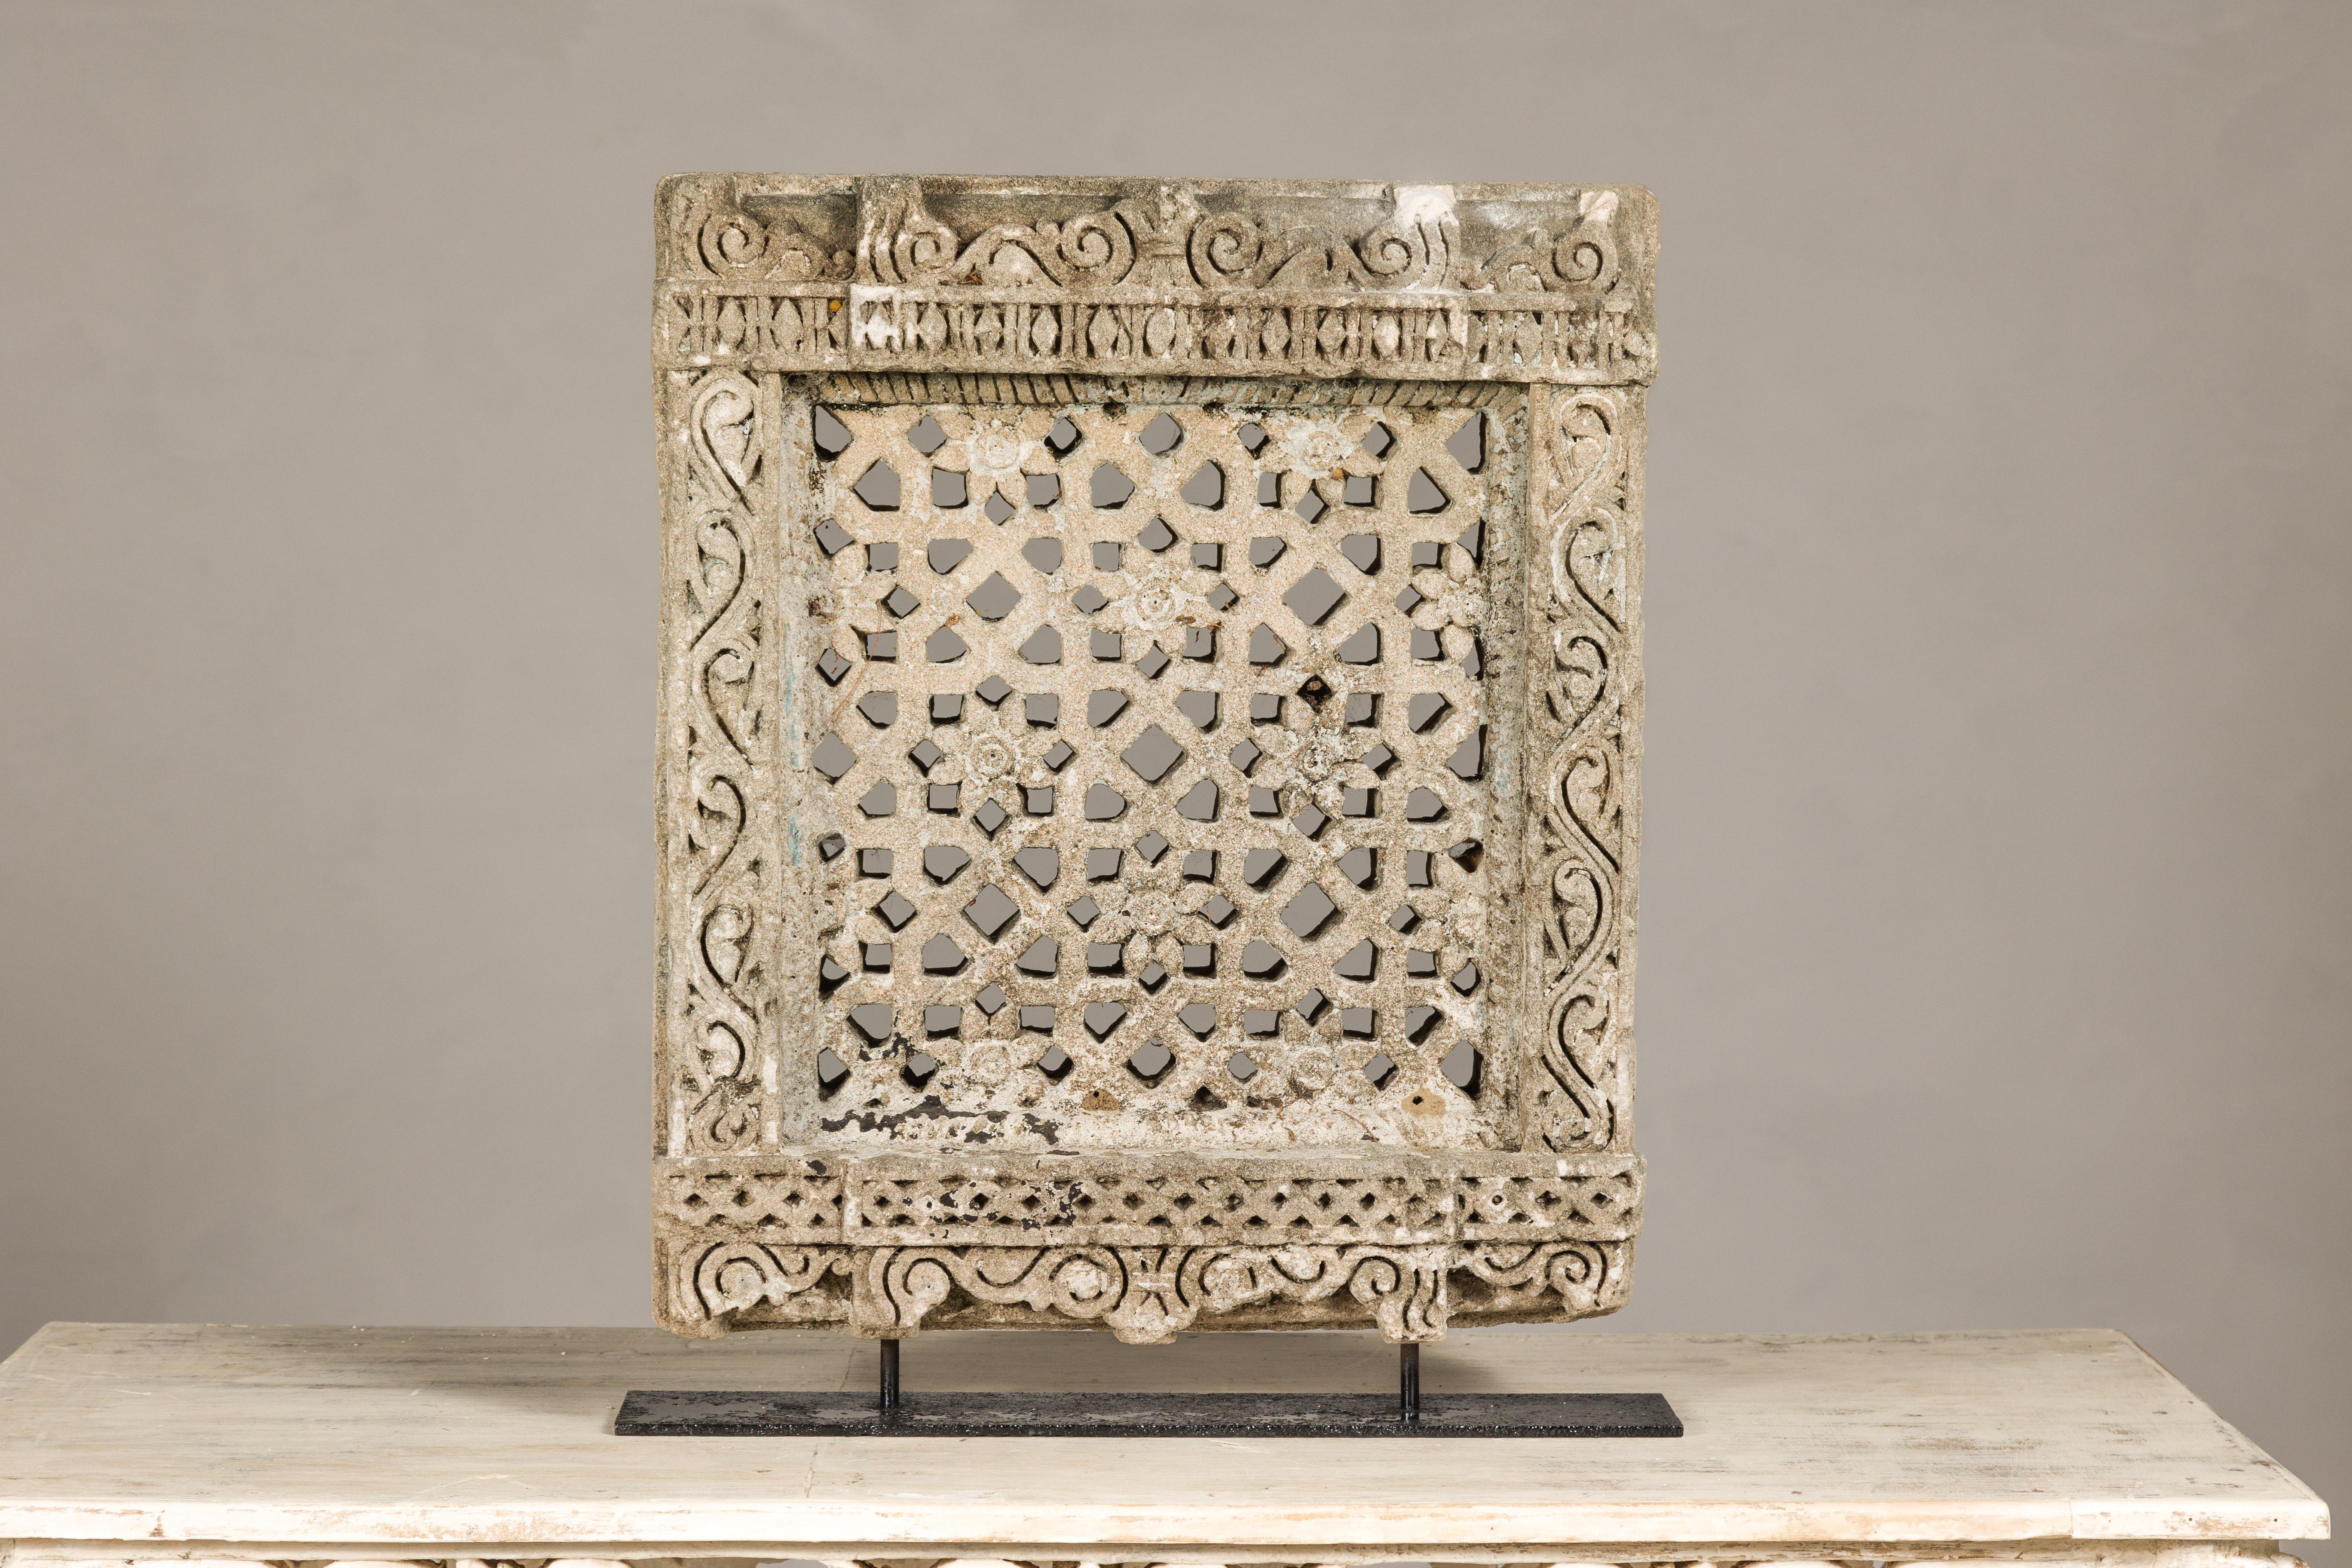 A small 19th century carved sandstone window sculpture from India mounted on a custom black base. Immersed in the rich tapestry of 19th-century Indian artistry, this carved sandstone window sculpture exudes historical allure. Emanating from an era